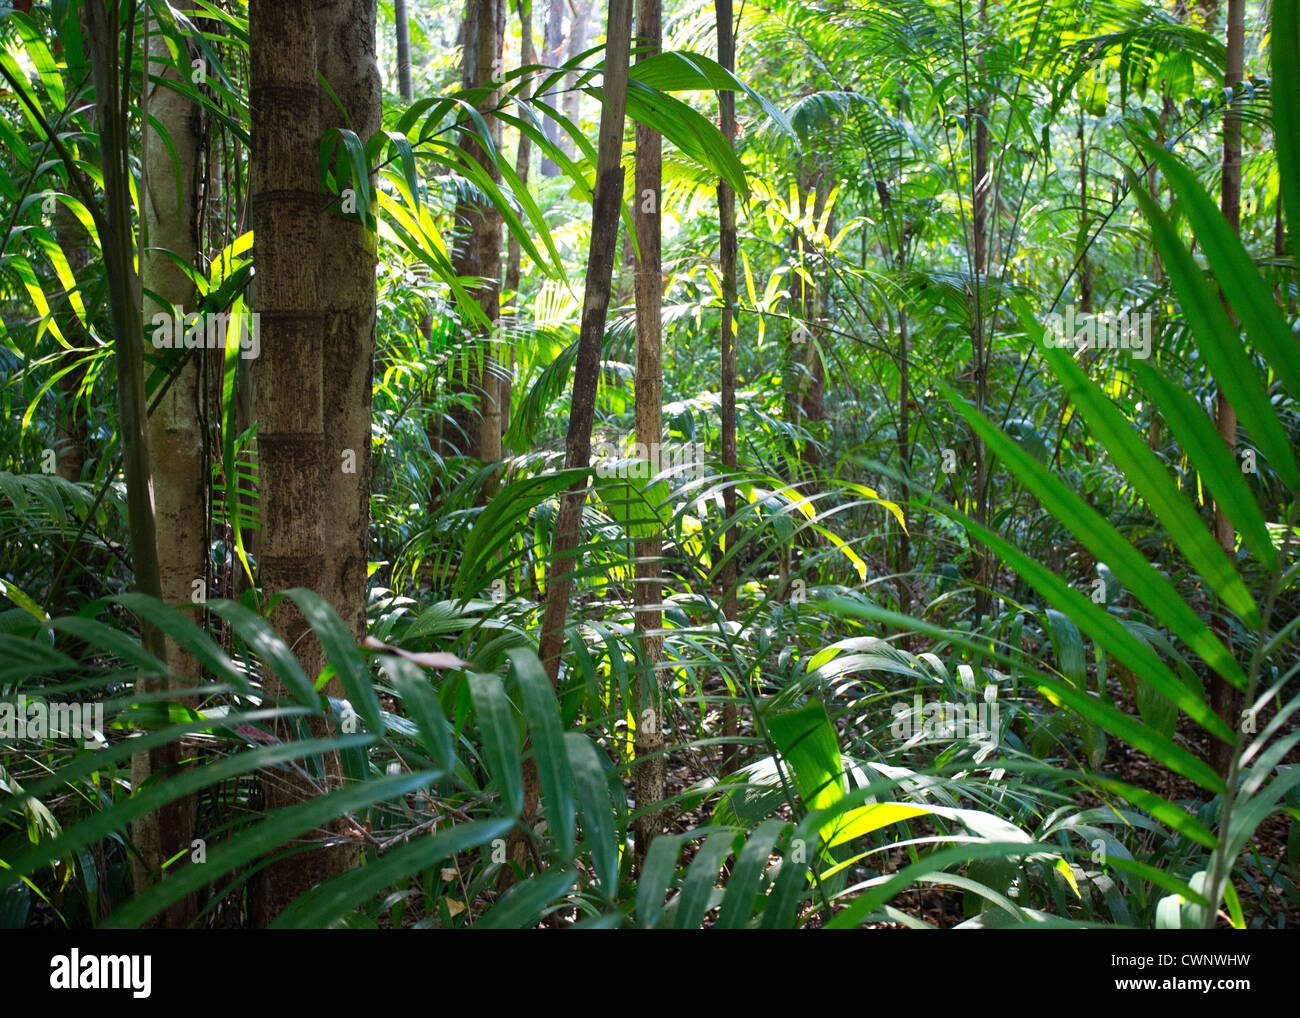 Palms and lush vegetation in tropical monsoon forest, Fogg Dam Conservation Area, Northern Territory, Australia Stock Photo